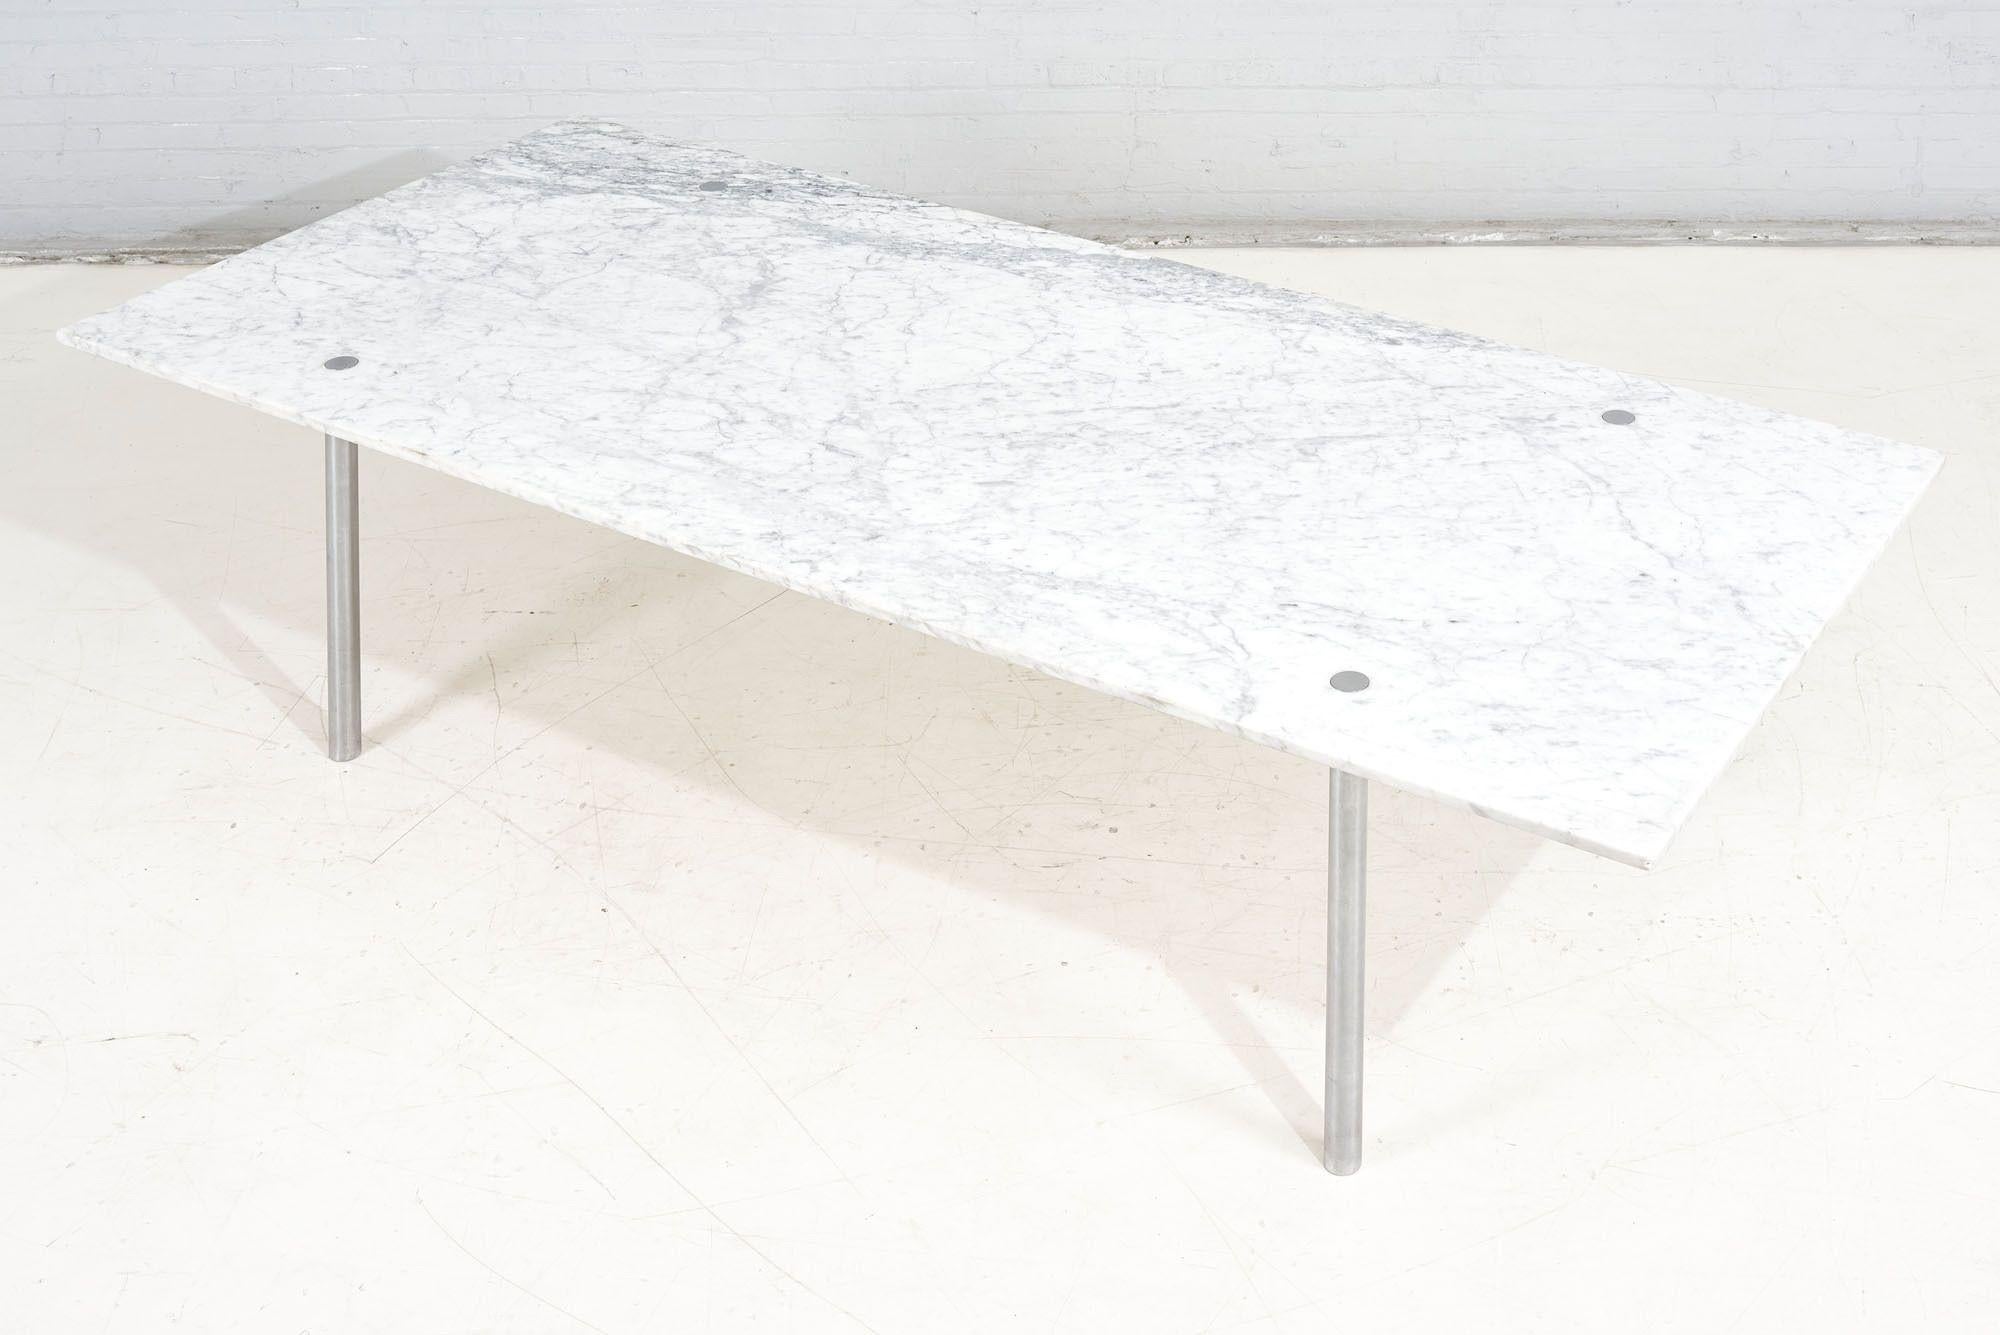 Carrara Marble dining table with stainless steel legs. Designed by William Katavolos, Ross Littel, and Douglas Kelly. Manufactured by Lavern International.